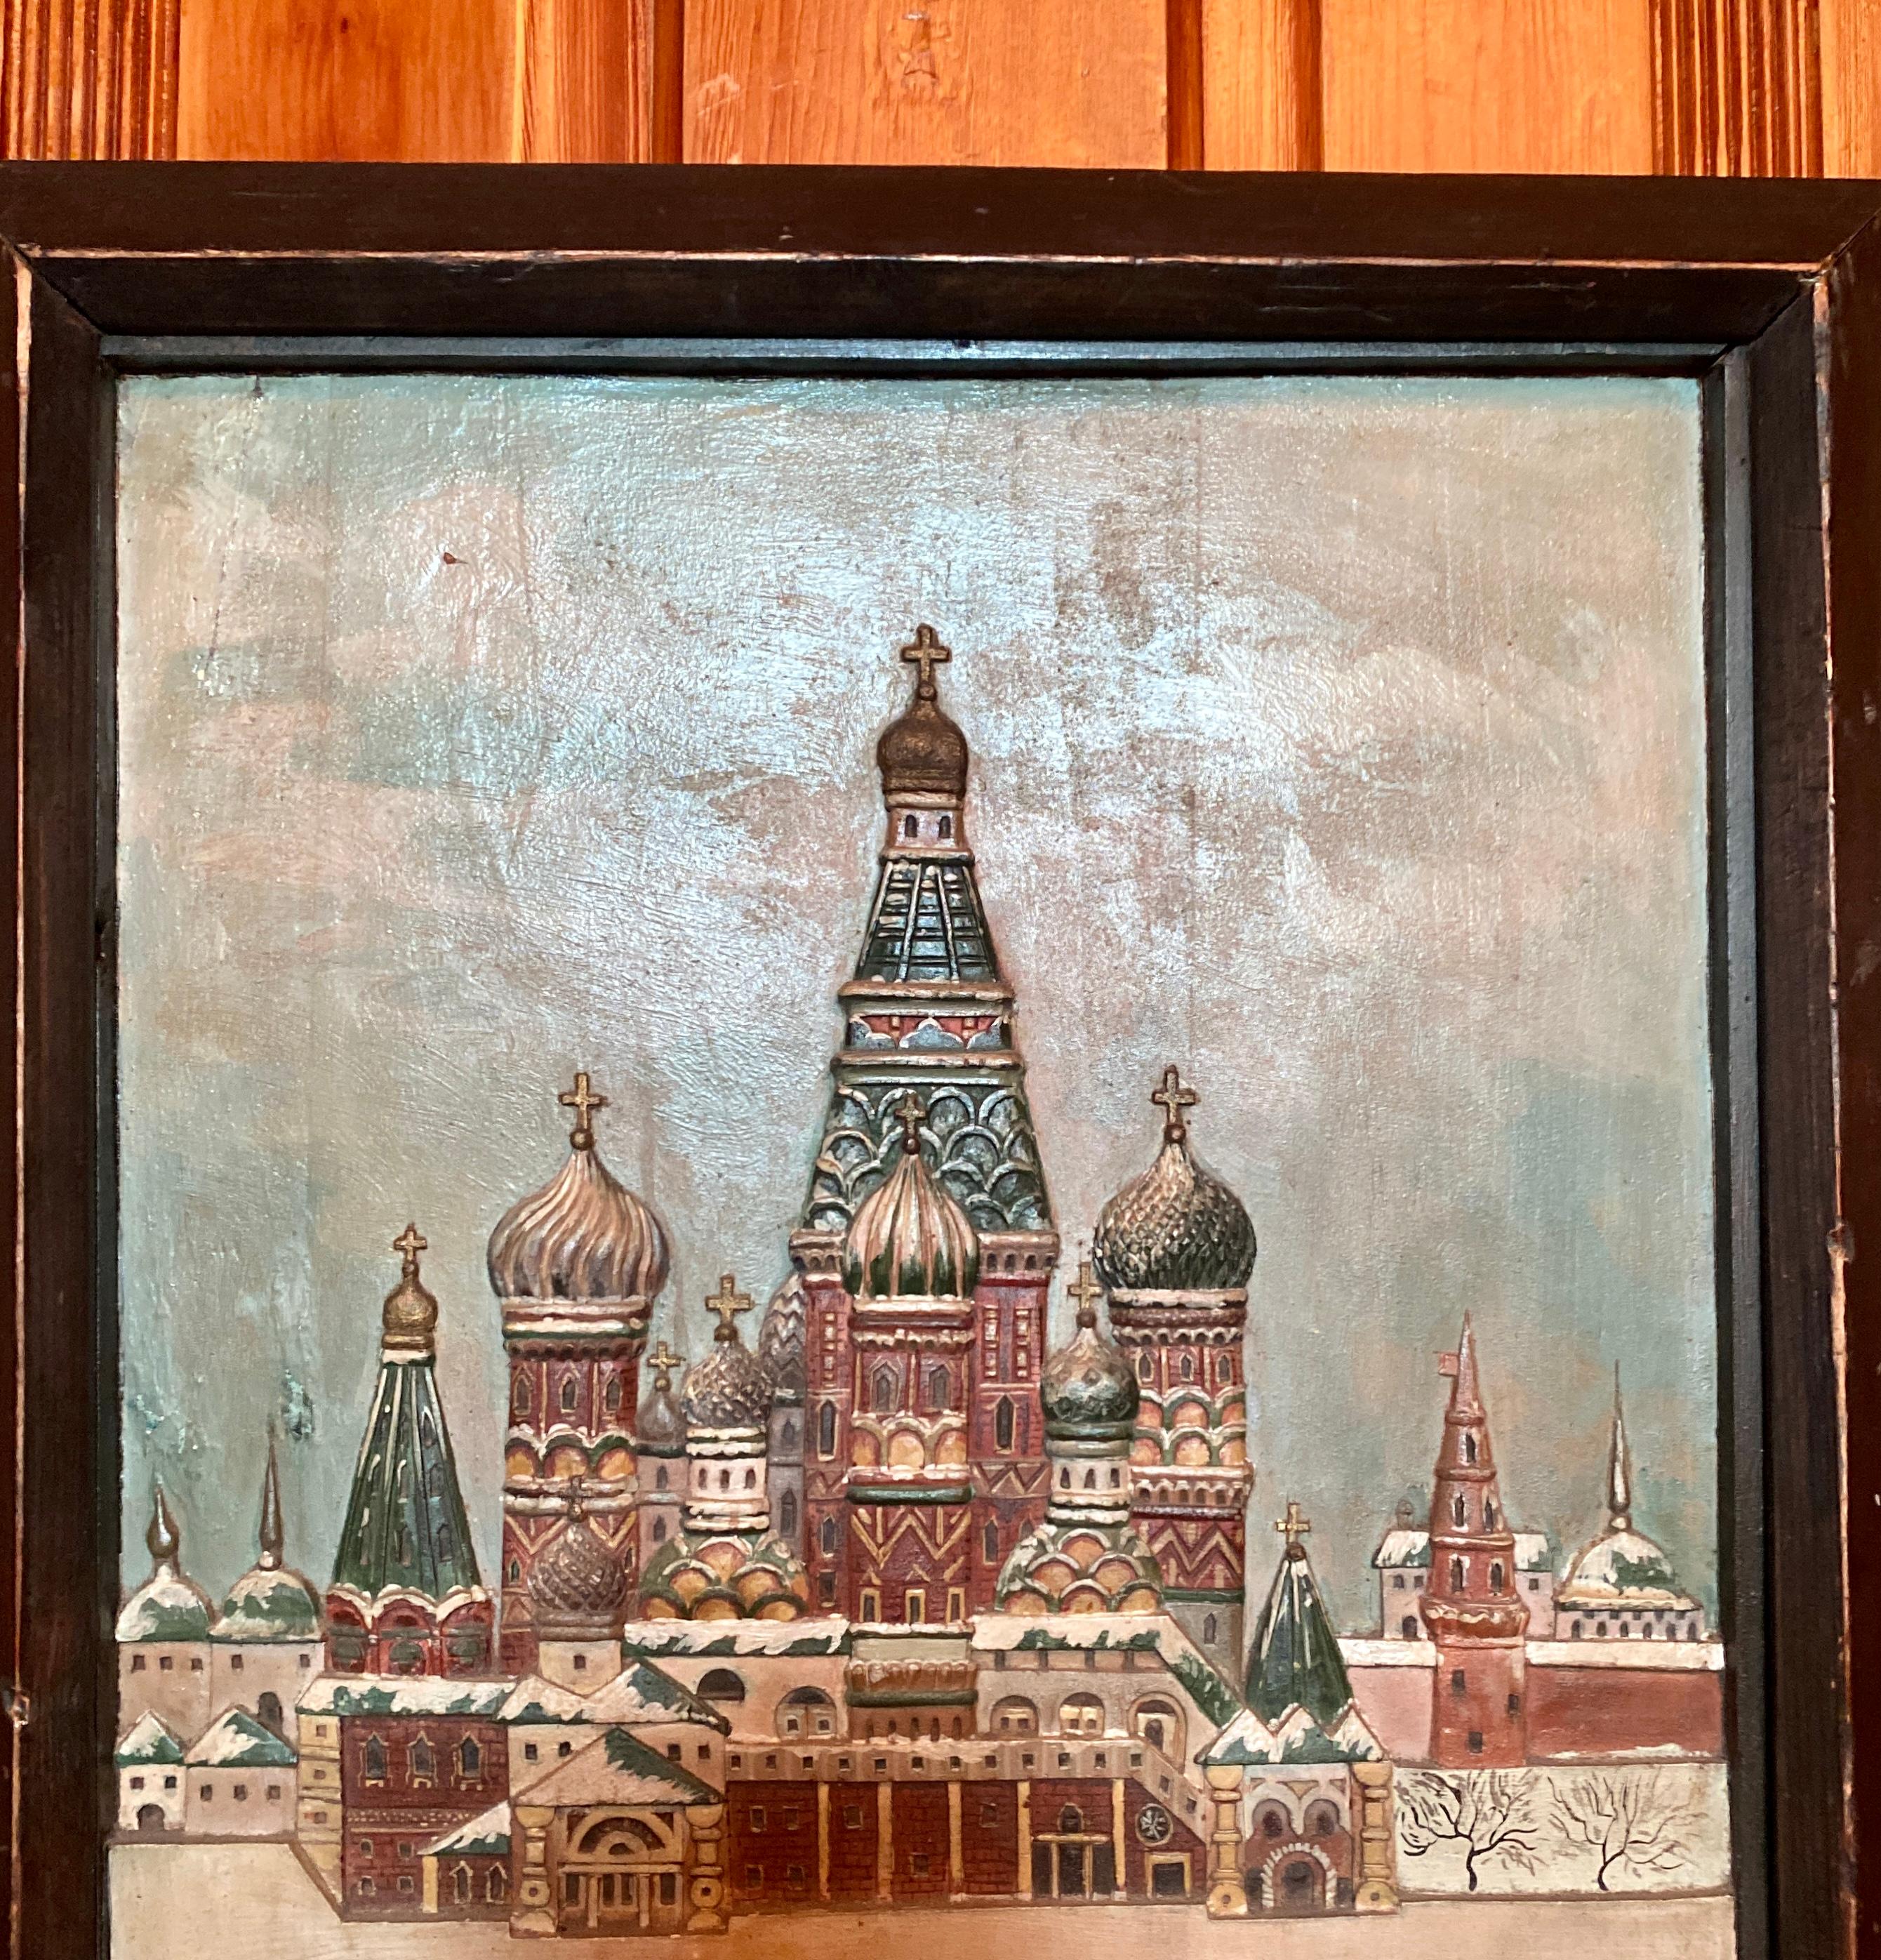 Antique Russian souvenir illustration of Moscow, circa 1910-1920.
Oil painting and carving on wood panel.